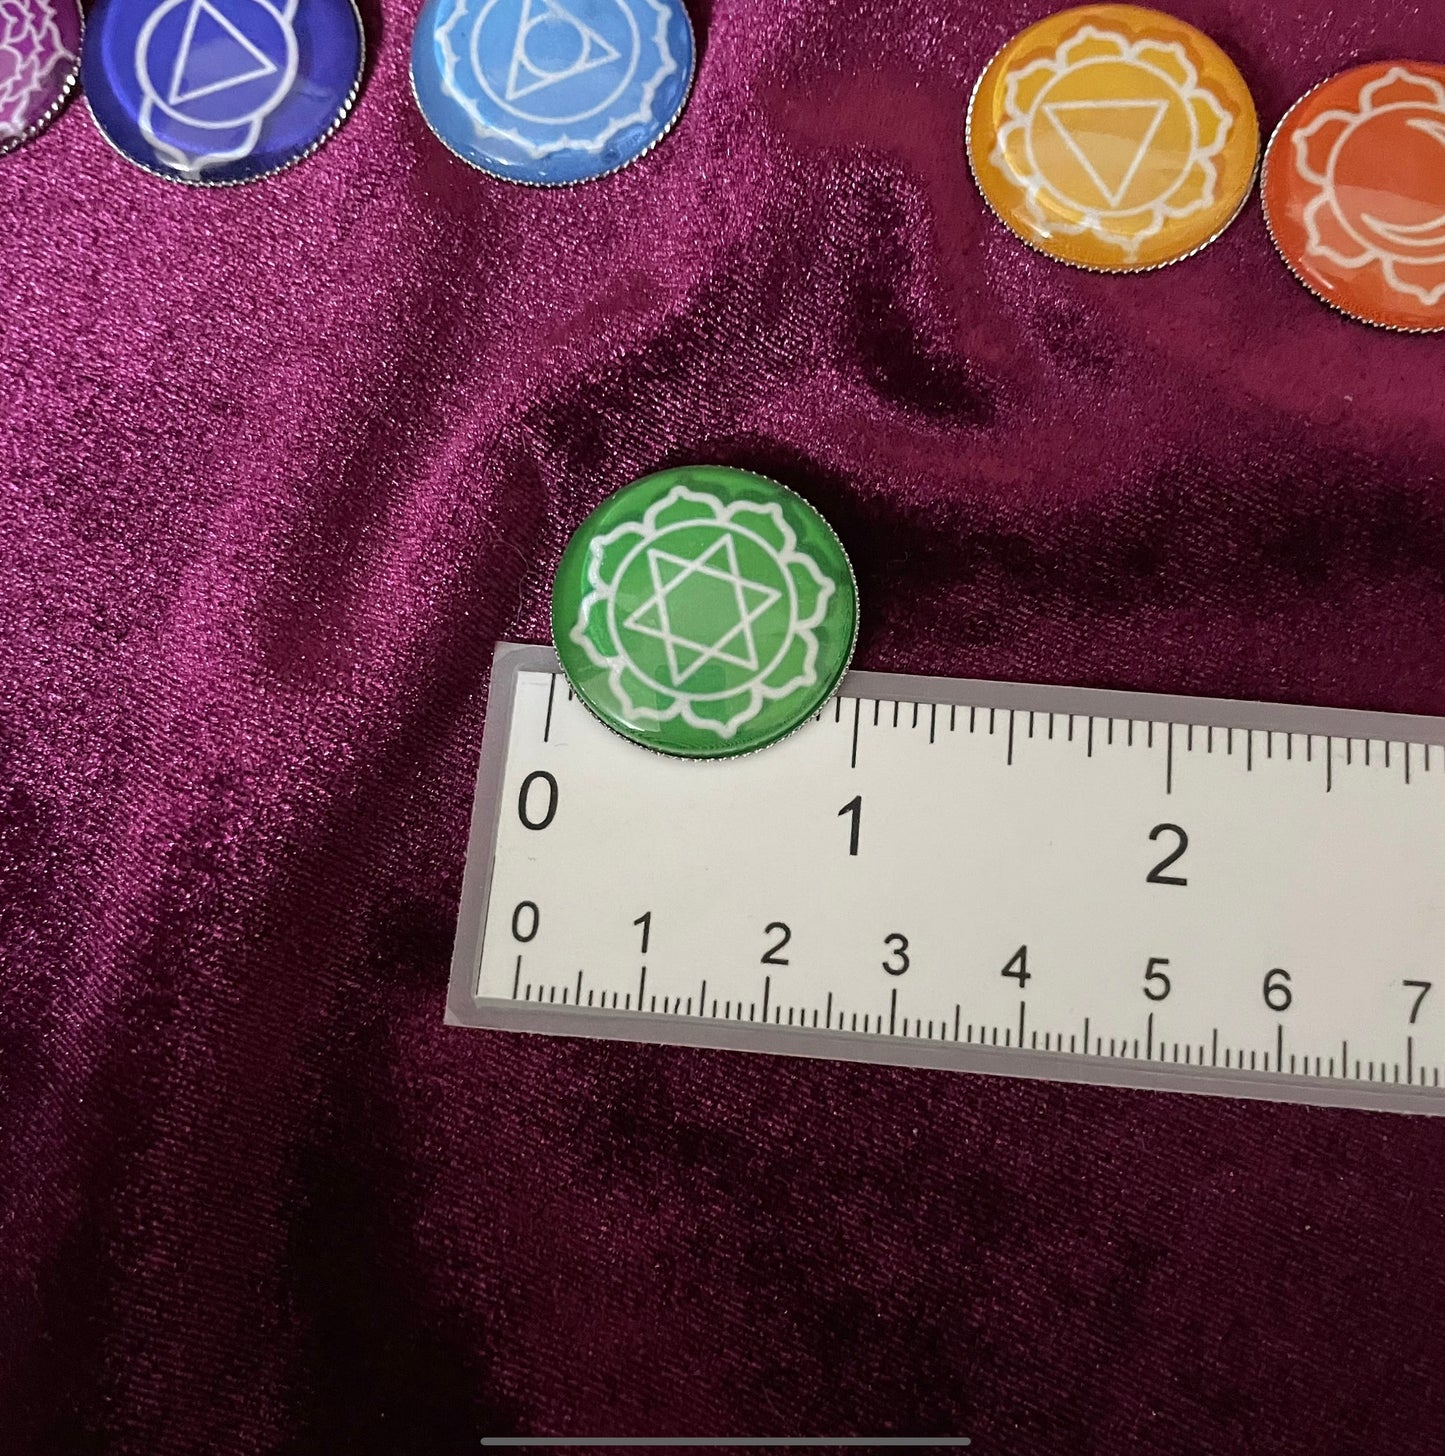 Chakra reading coins to add in to your charm kits.